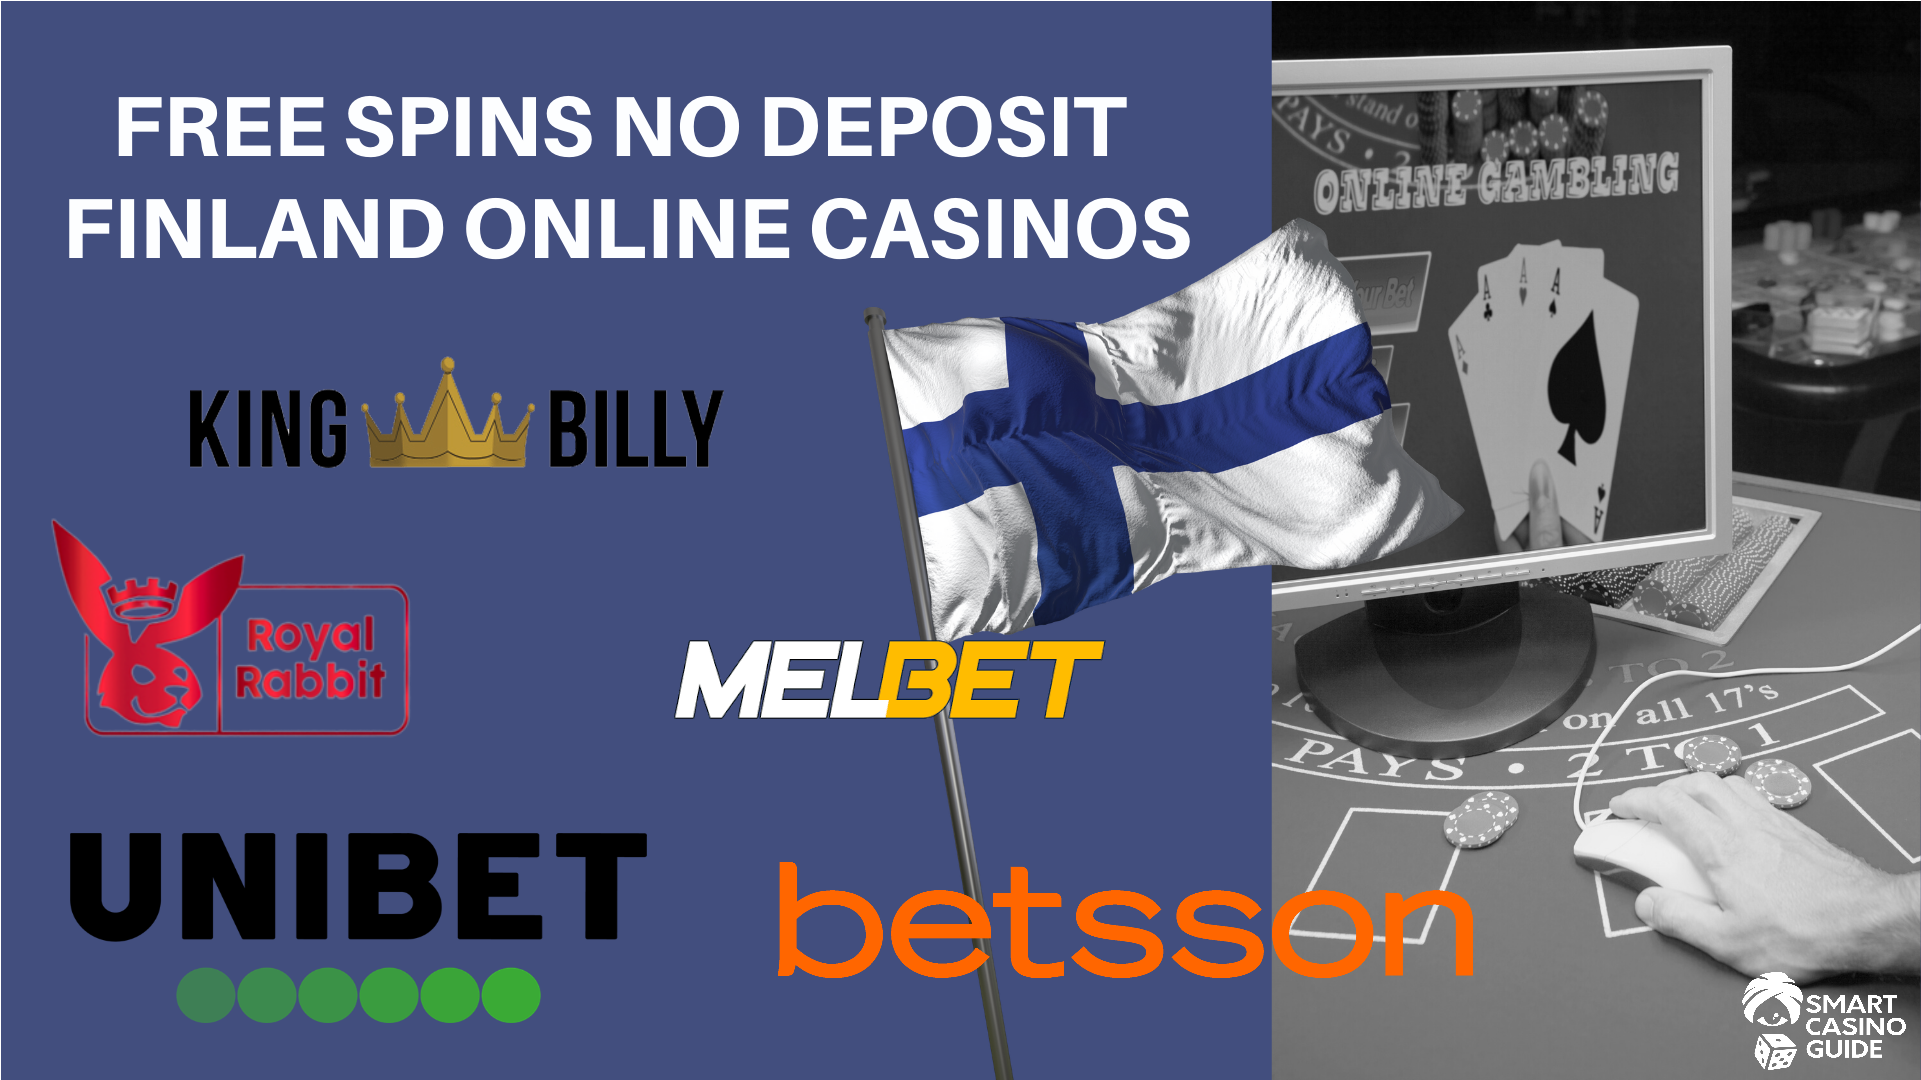 Can You Pass The online casino slots Test?